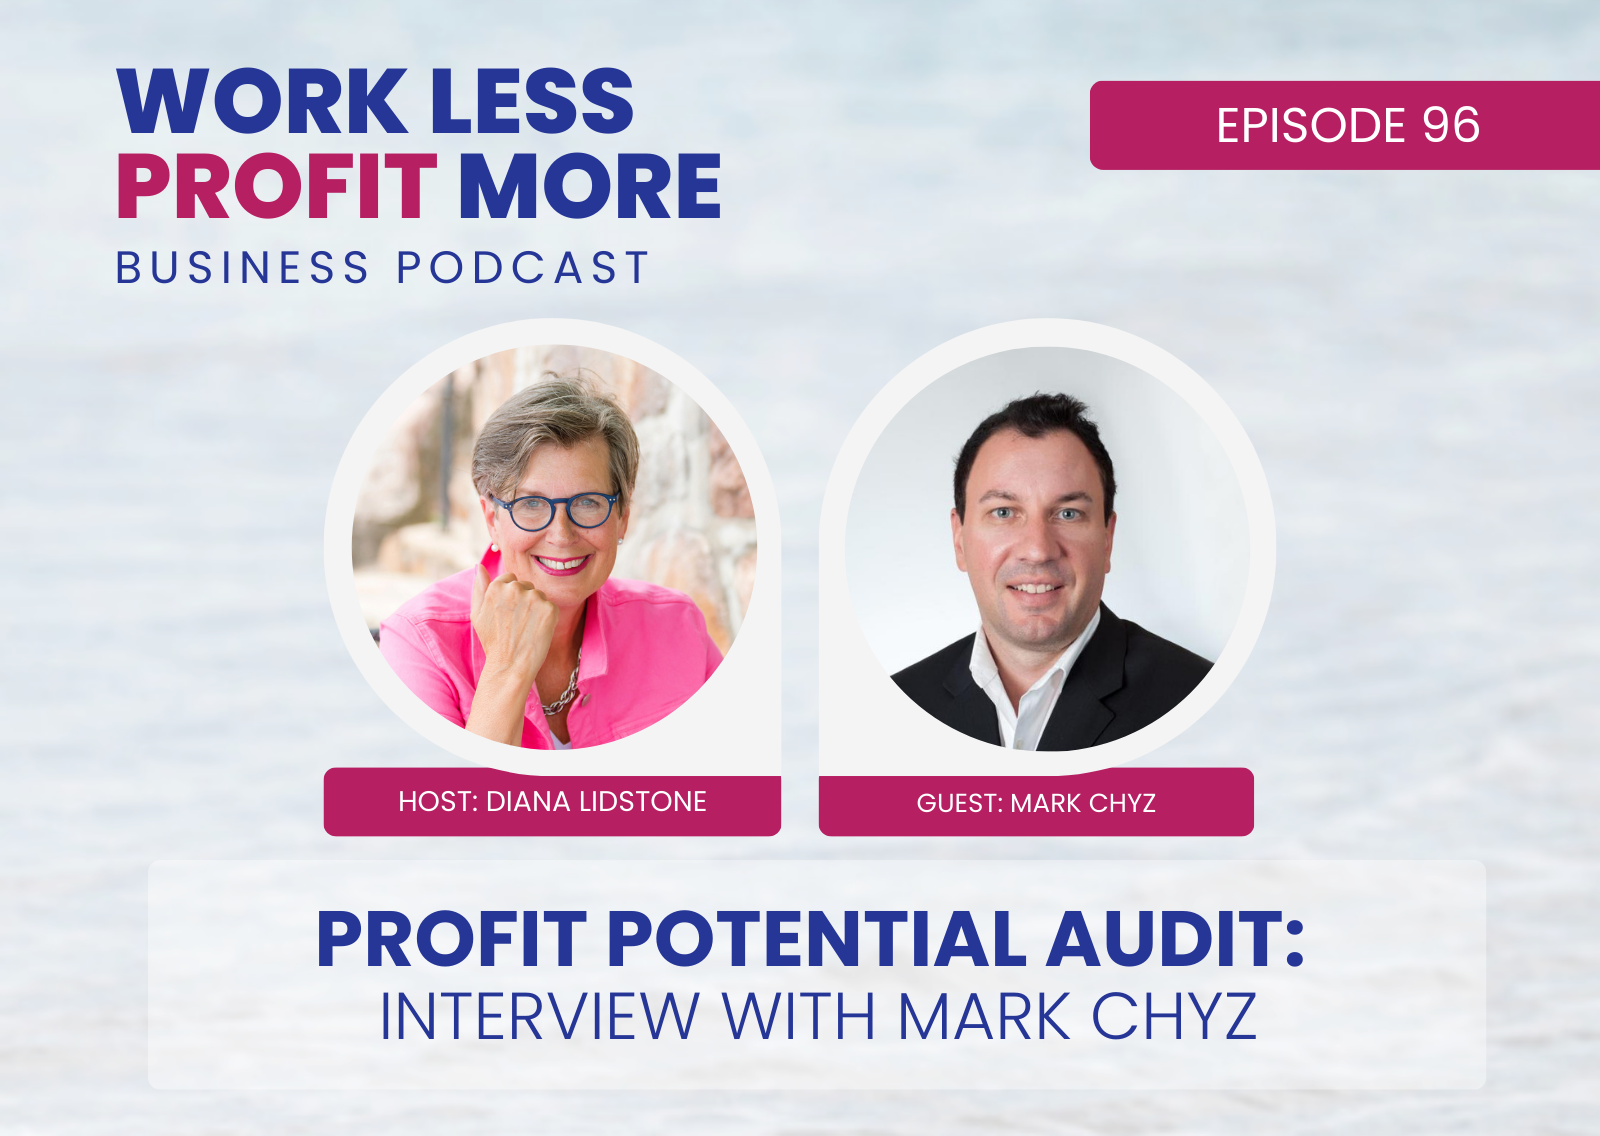 Profit Potential Audit- Interview with Mark Chyz